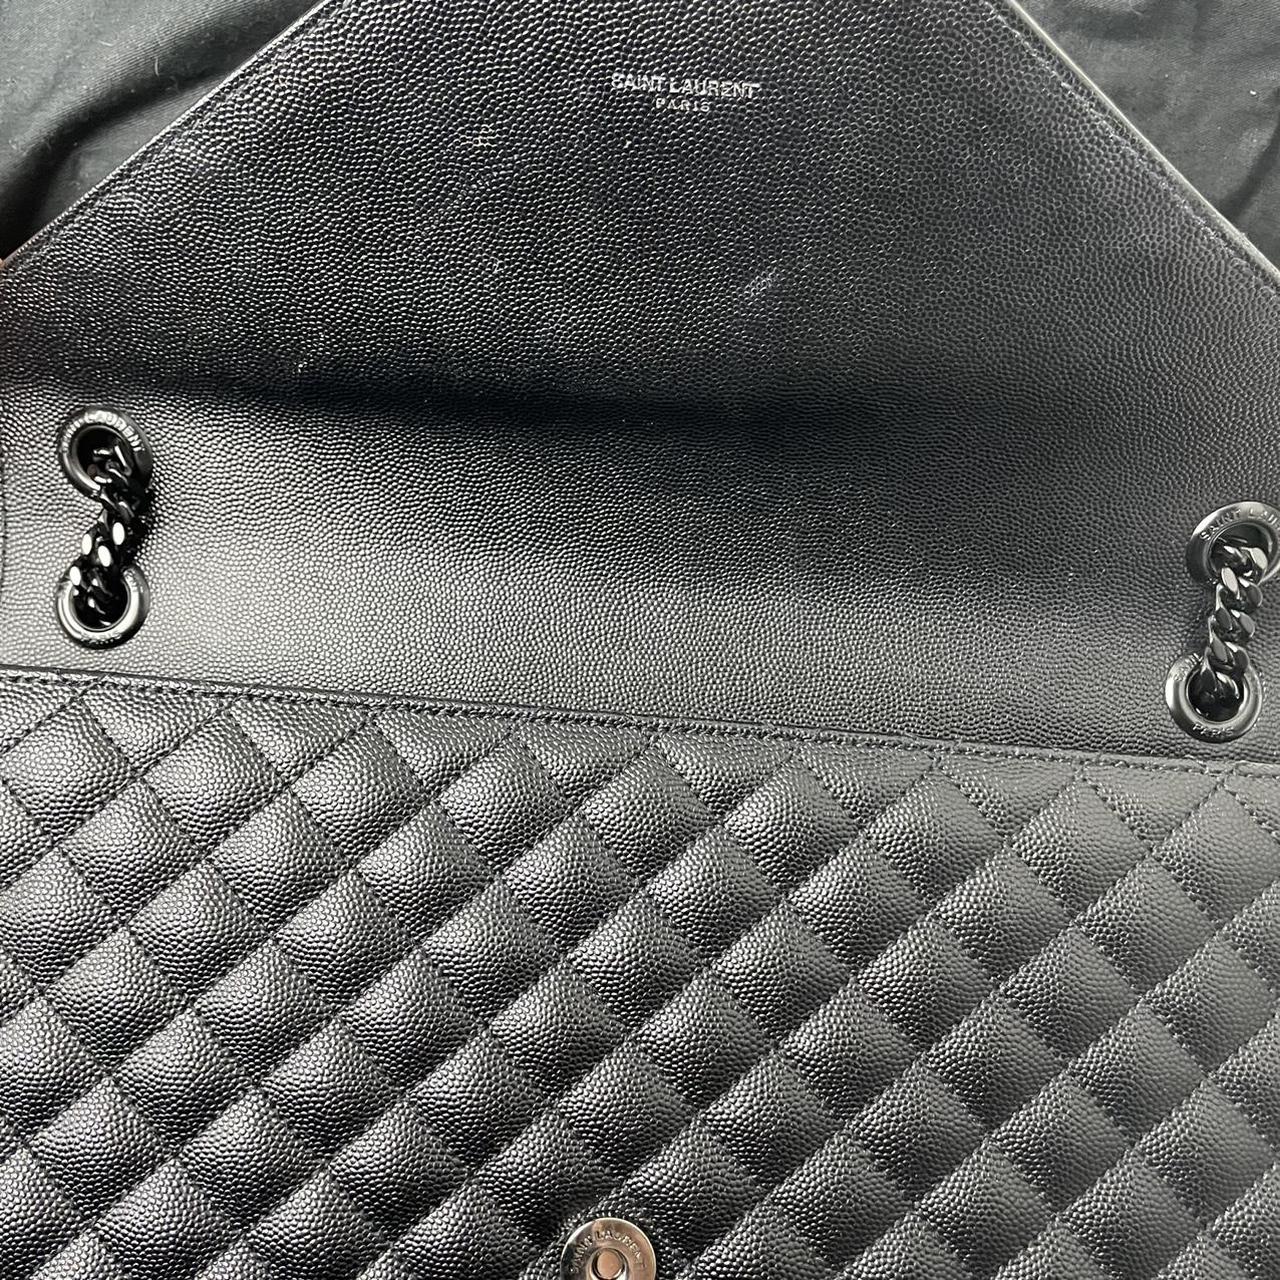 Authentic YSL LARGE WALLET ON CHAIN . CLASSIC - Depop